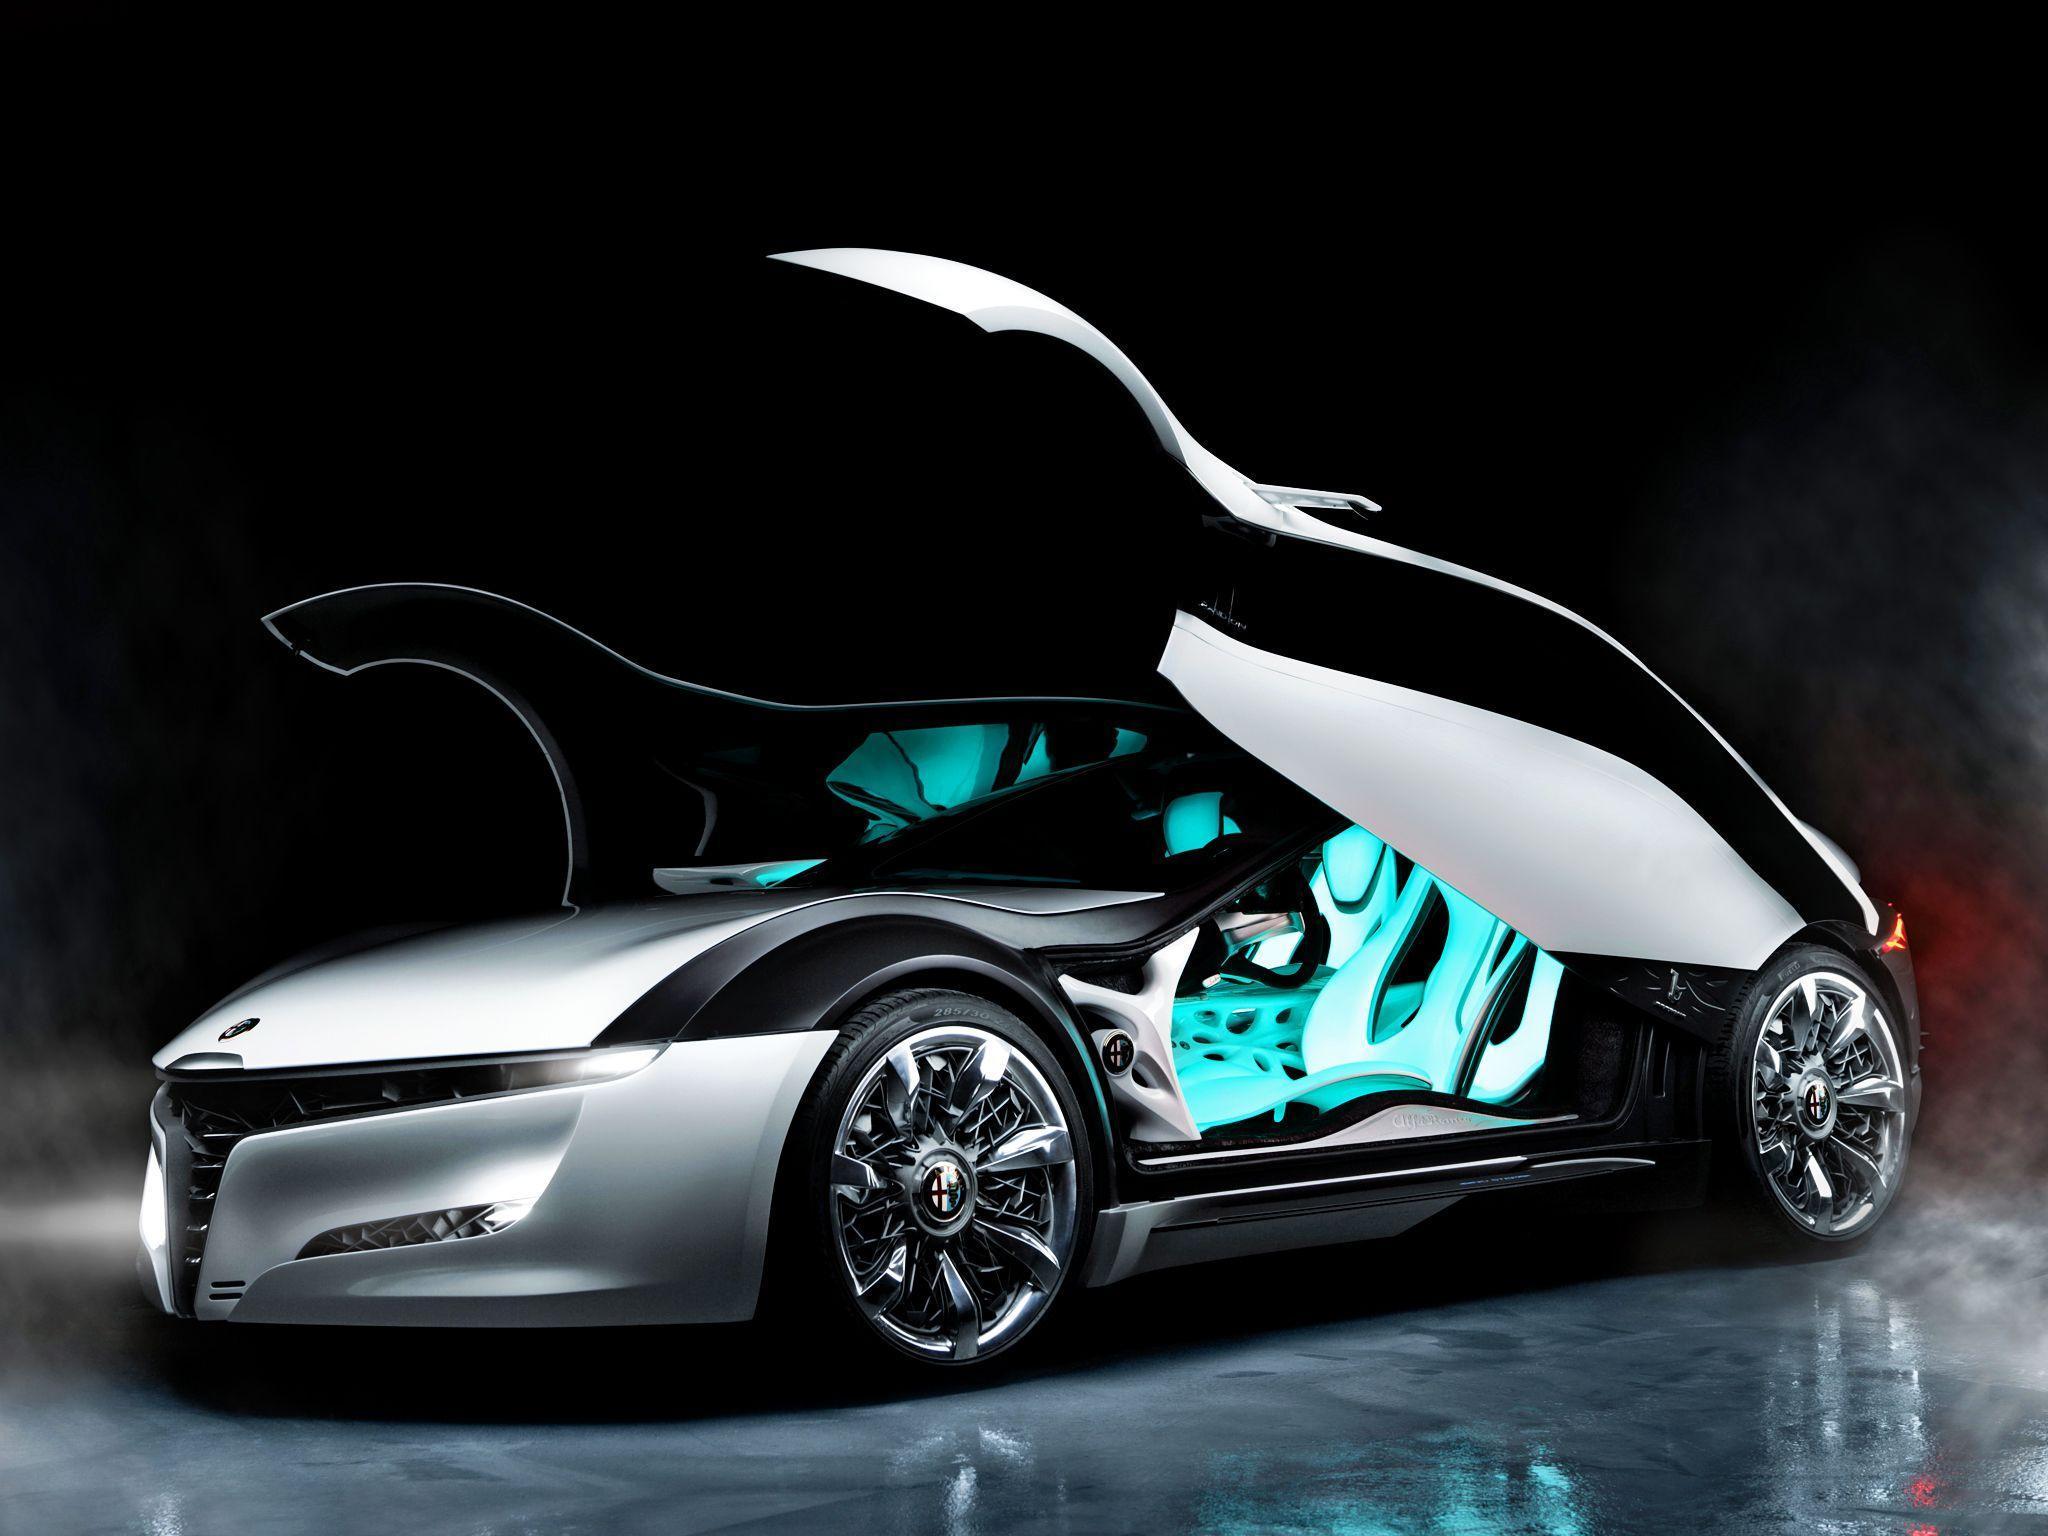 Concept Cars Wallpaper, 38 Concept Cars High Resolution - Best Car Wallpapers In The World - HD Wallpaper 